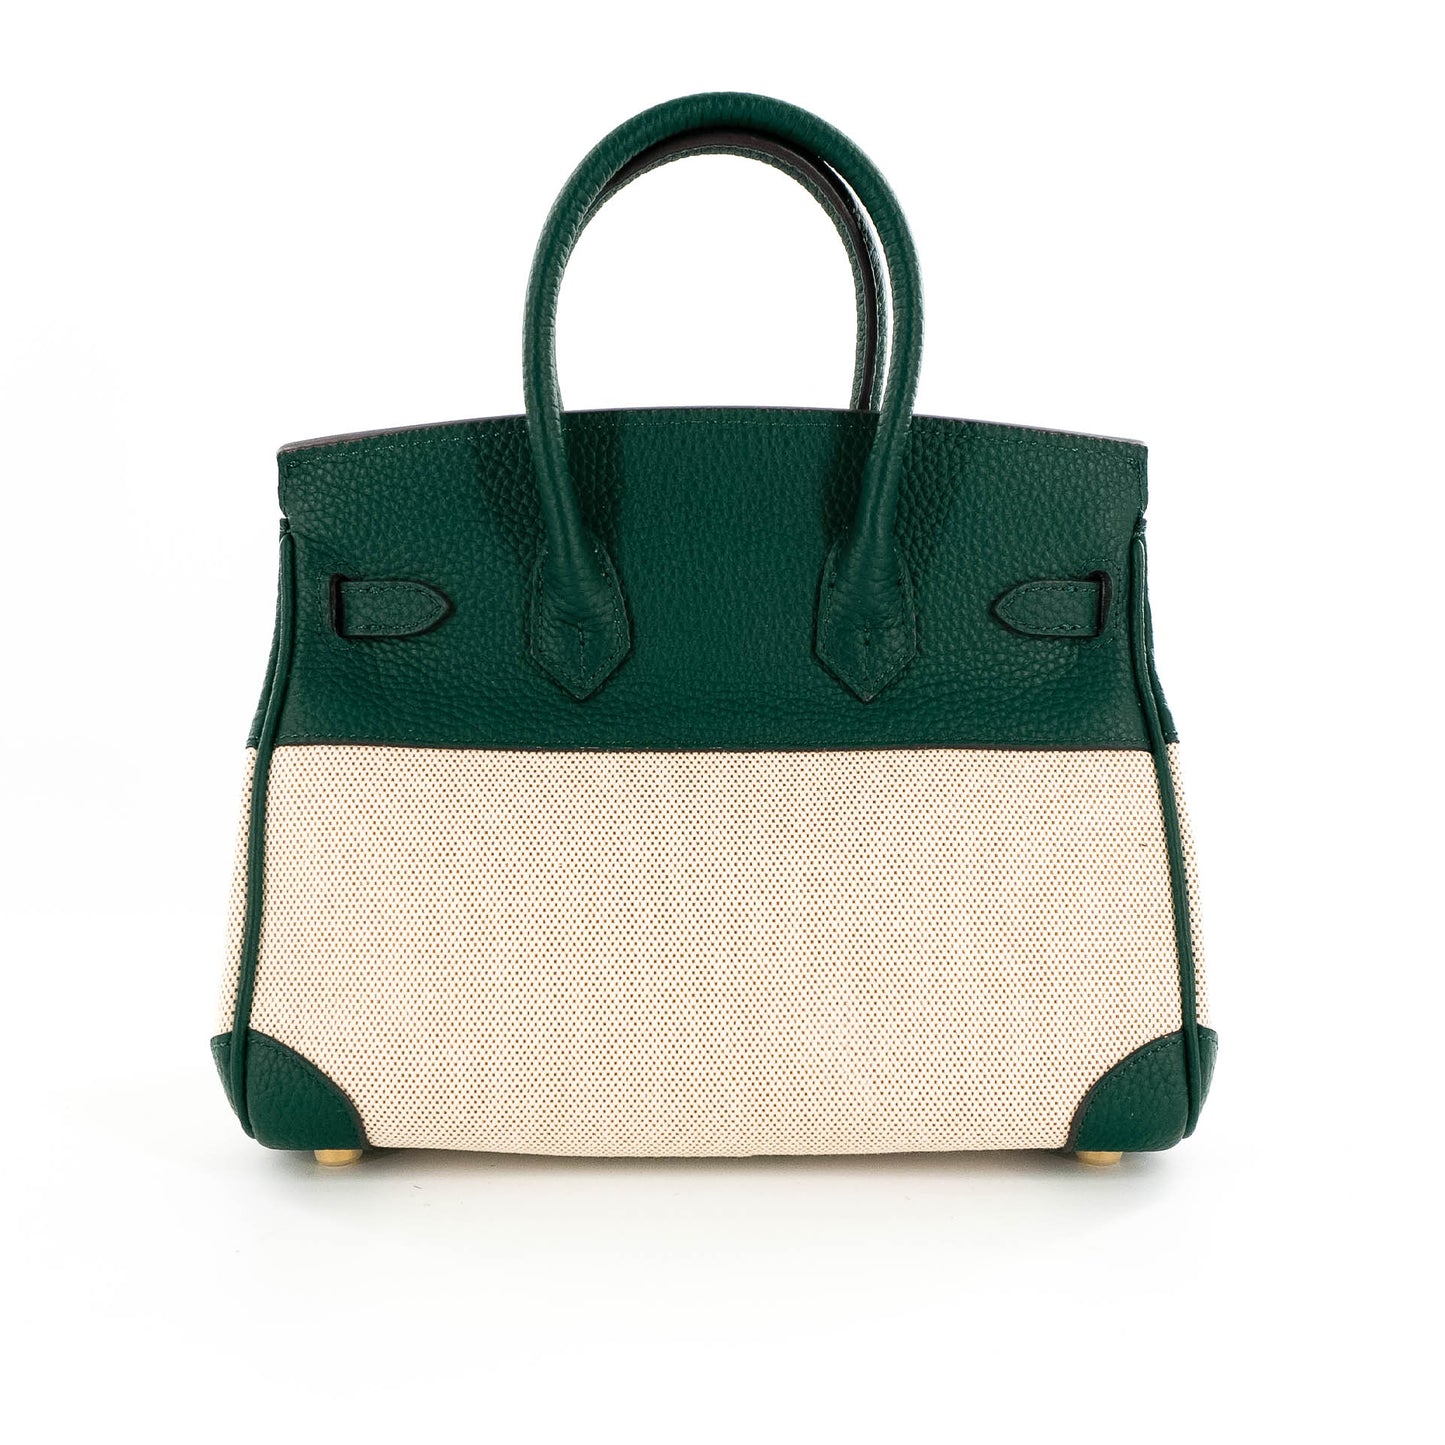 Duchess Handbag in Canvas and Green Leather